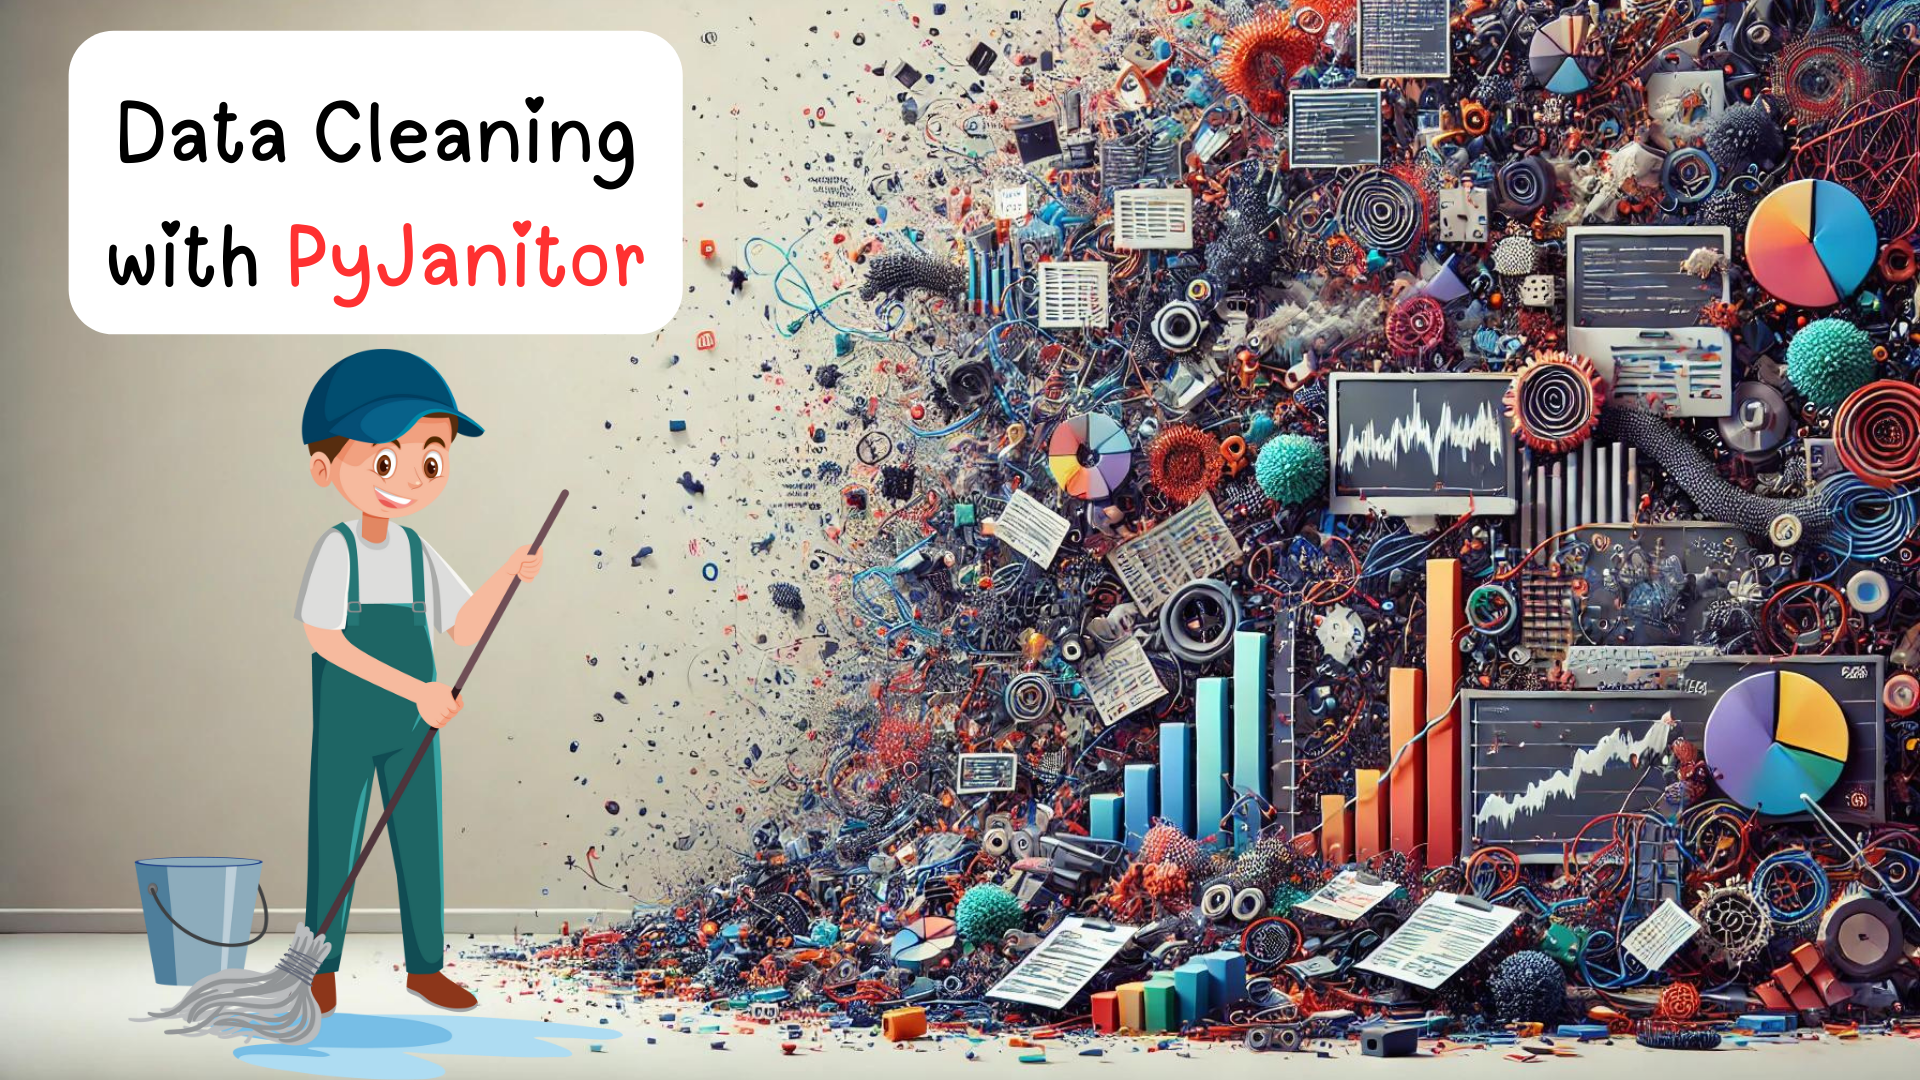 Data cleaning with PyJanitor